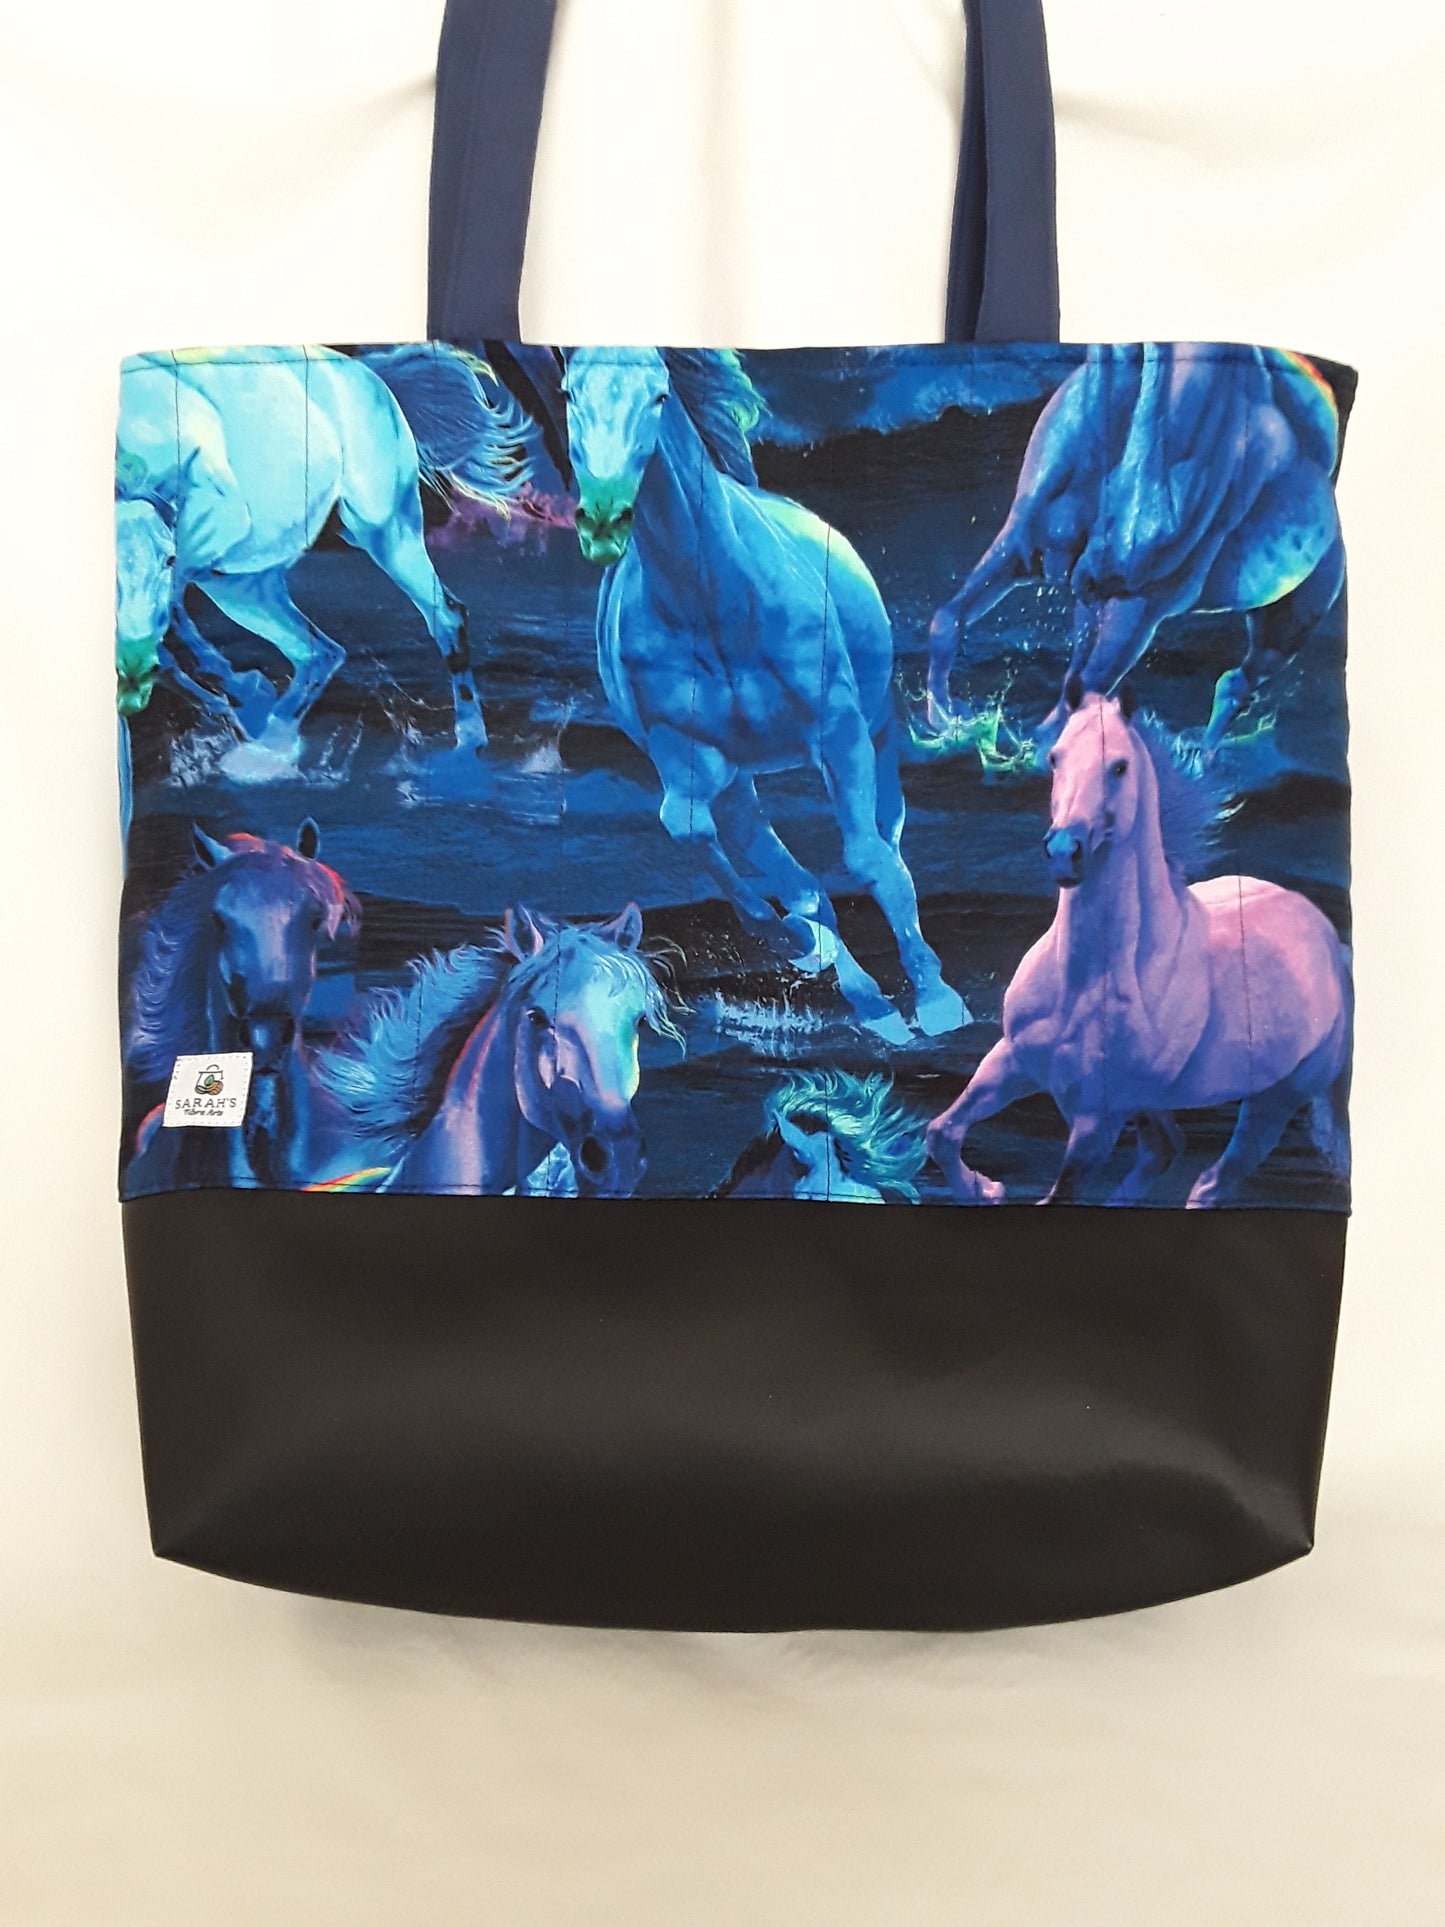 Tote Bag, Blue and Lilac Horses Tote Bag, Quilted Tote Bag, Horse Tote Bag